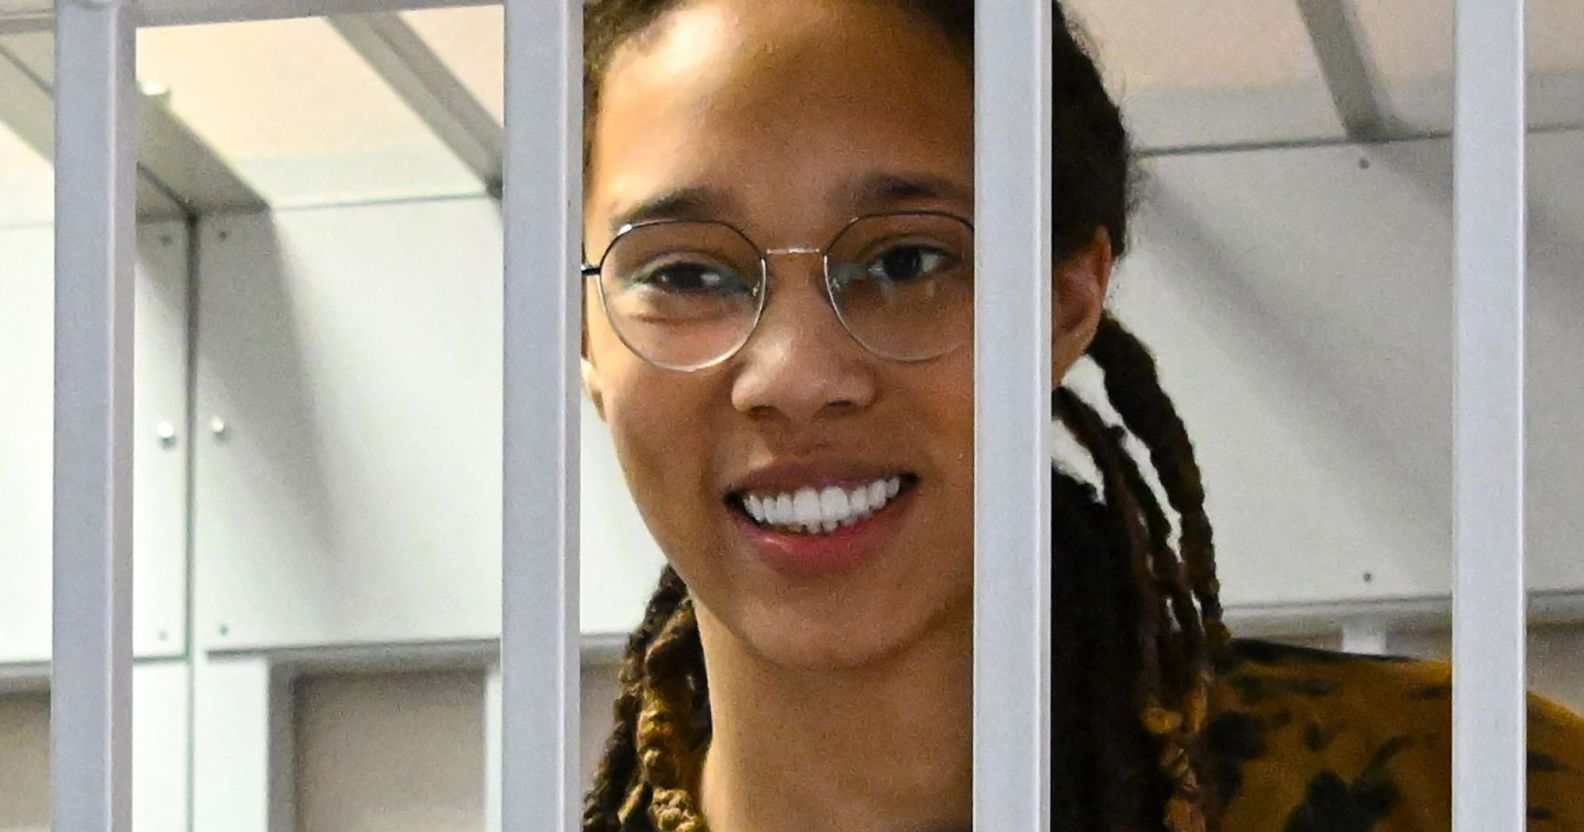 Brittney Griner smiles as she stands behind while bars while attending a Russian court hearing